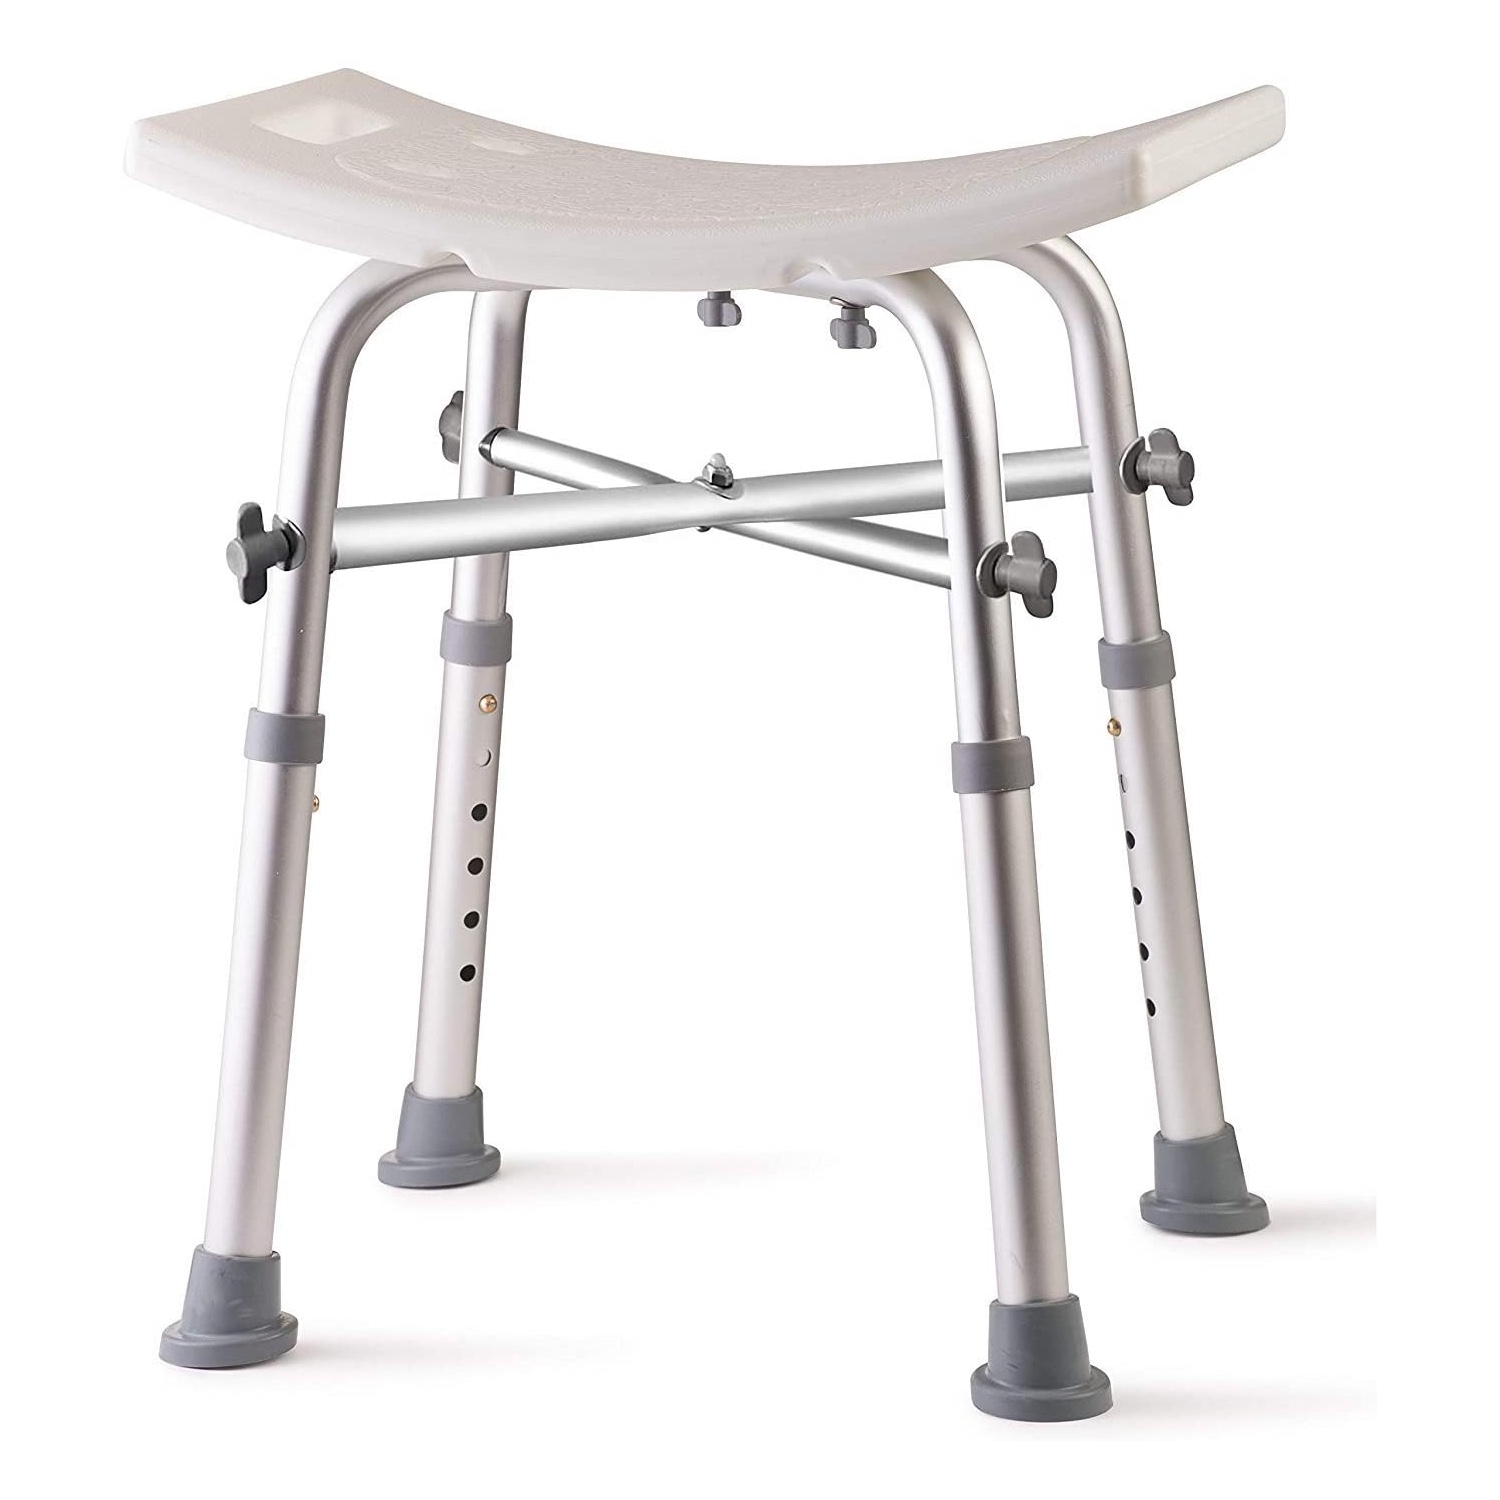 Dr Kay's Adjustable Height Shower Bench